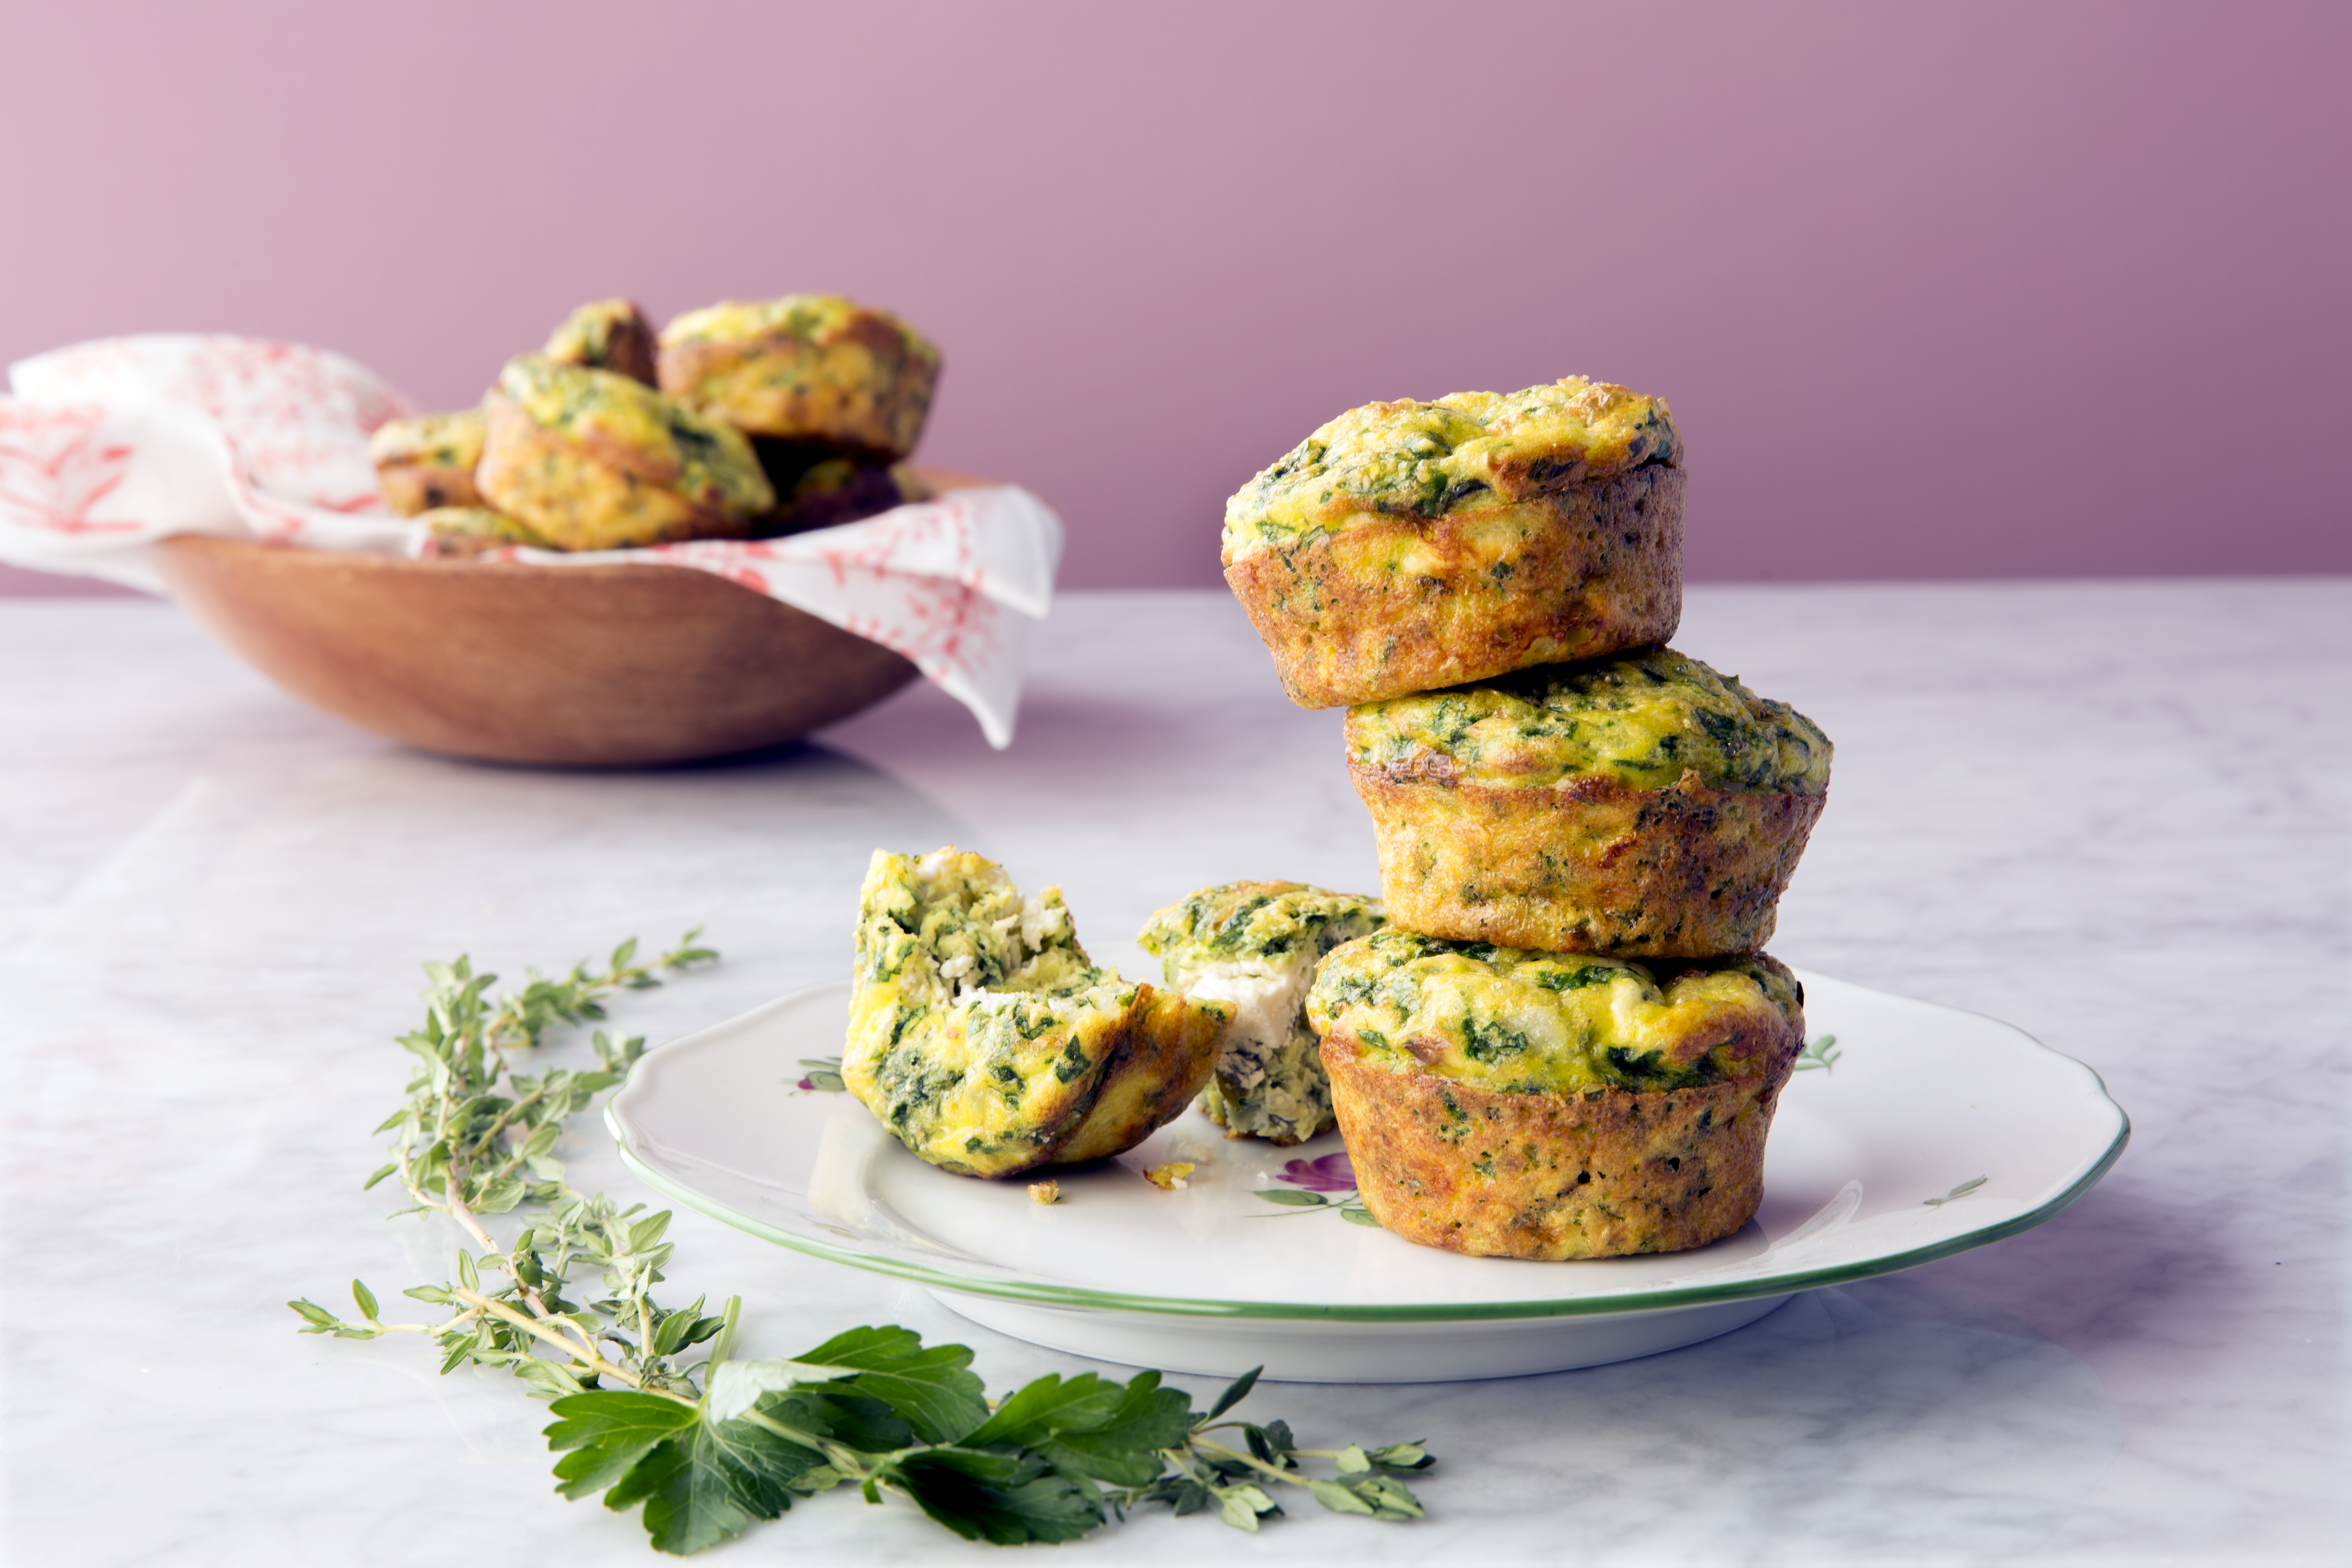 Herb and Goat Cheese Crustless Quiches